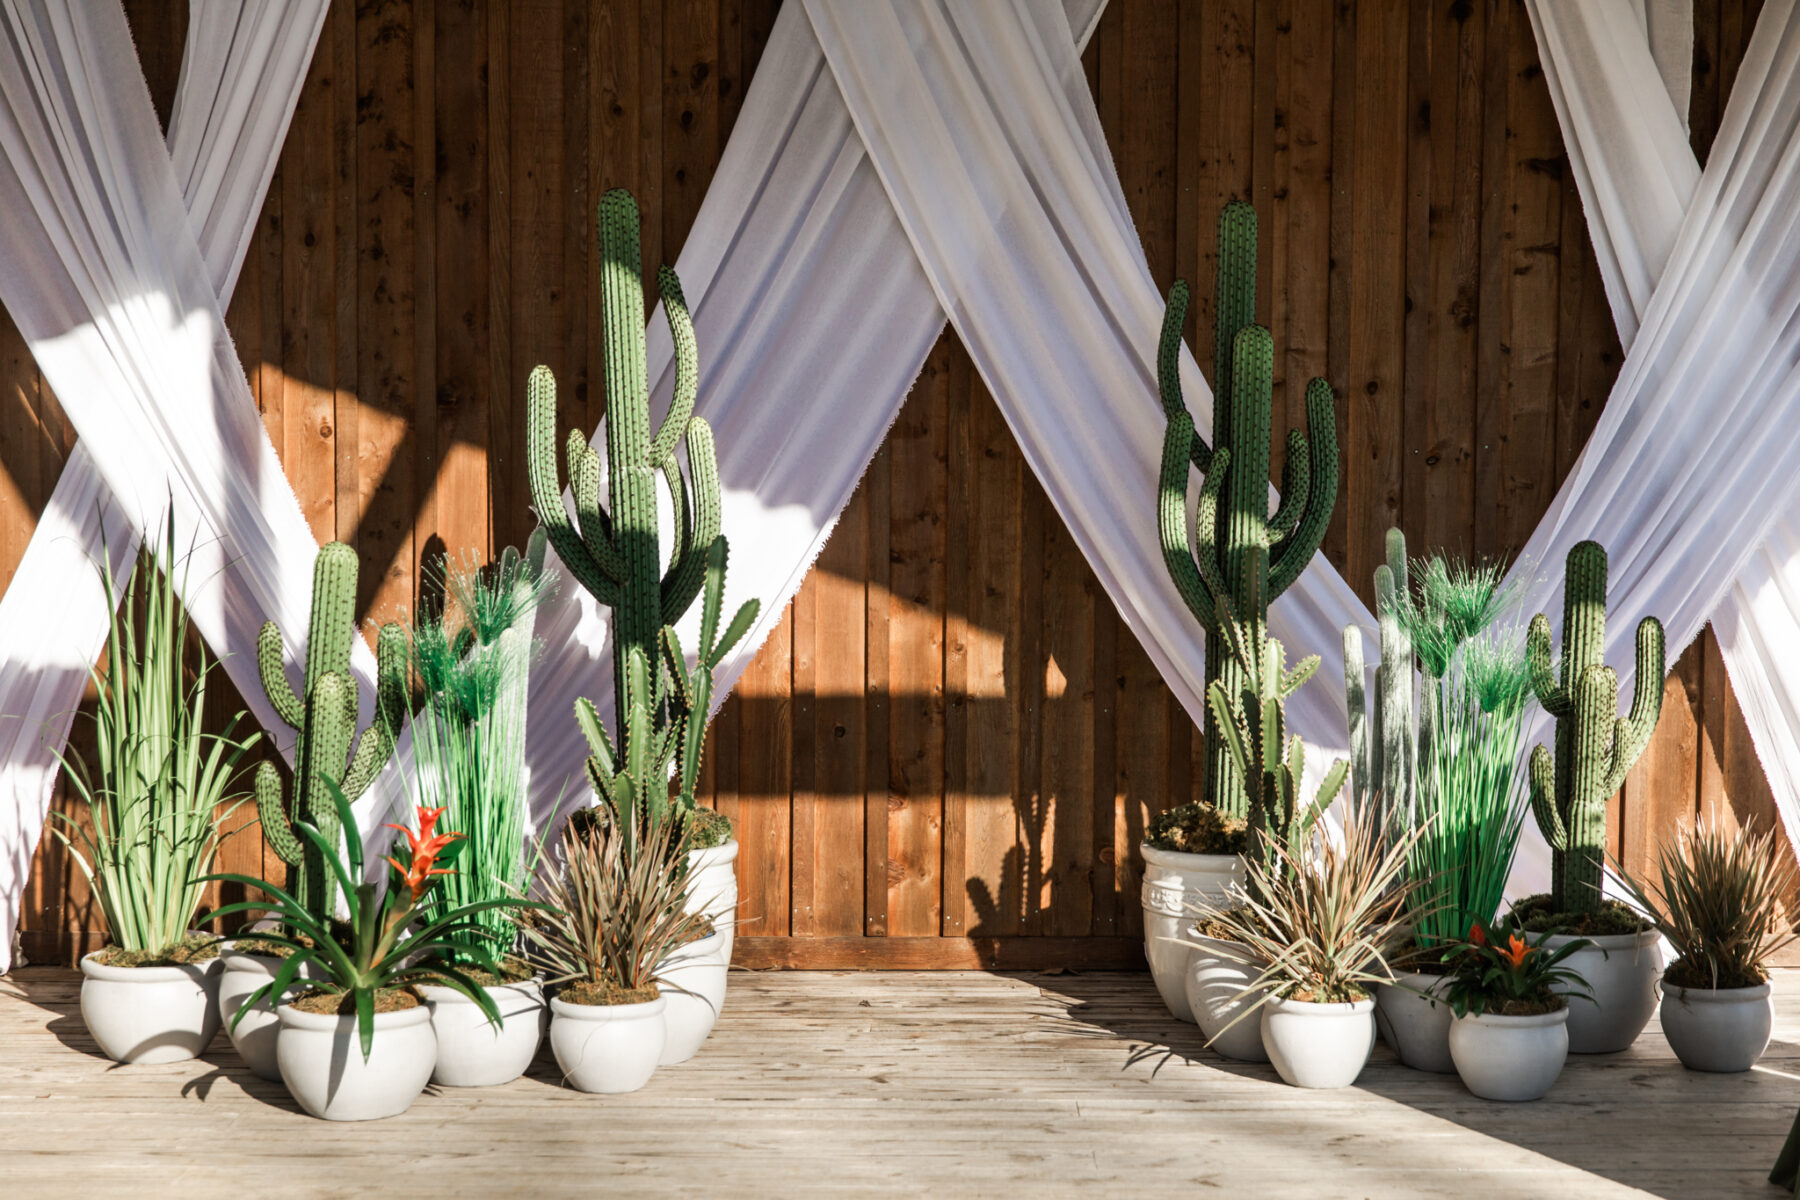 Cactus wedding decor: Western Inspired Wedding by Laurie D'Anne Events featured on Nashville Bride Guide